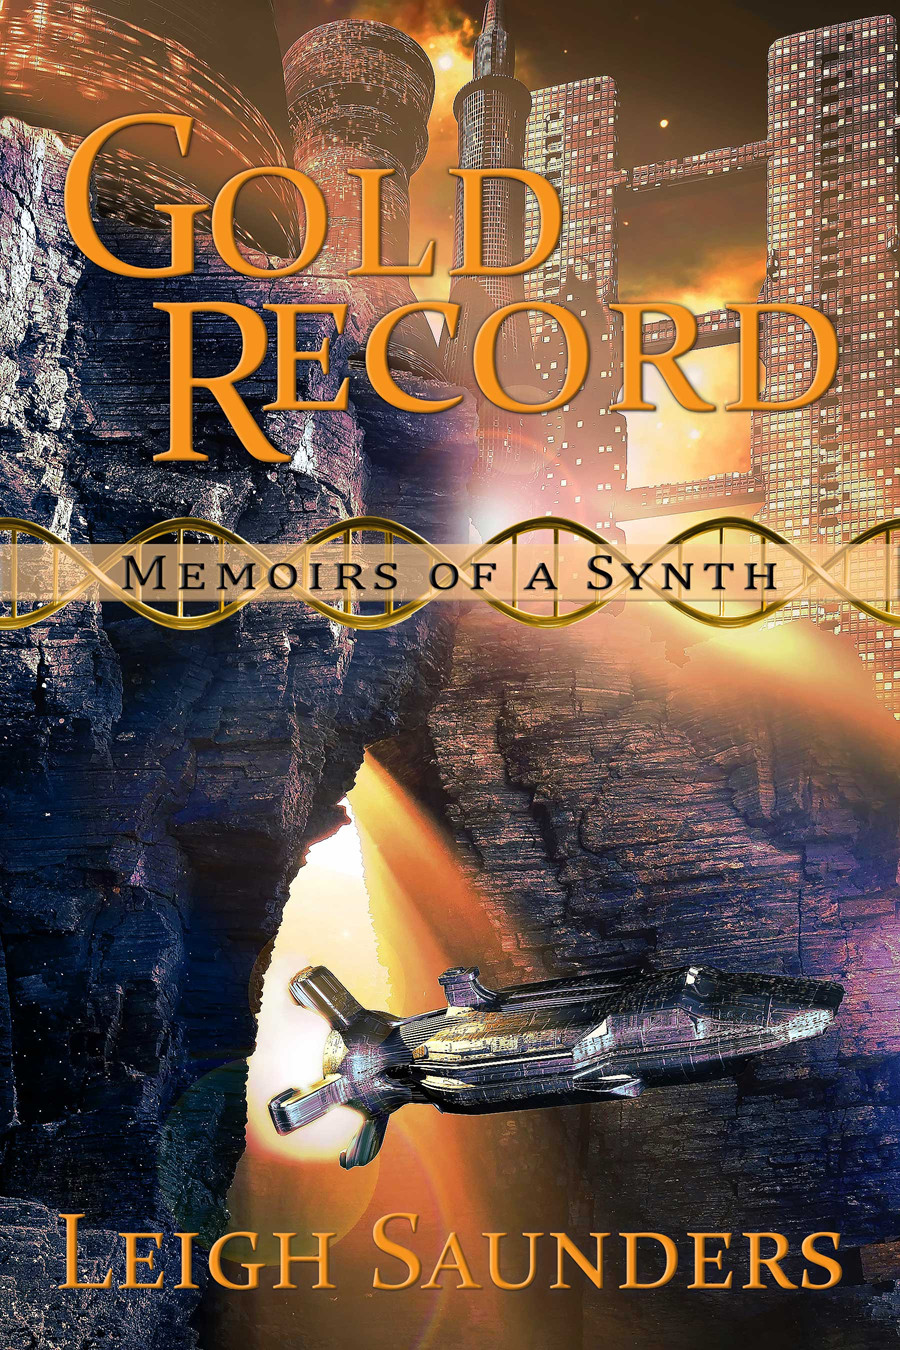 Synth: Gold Record, a novel by Leigh Saunders